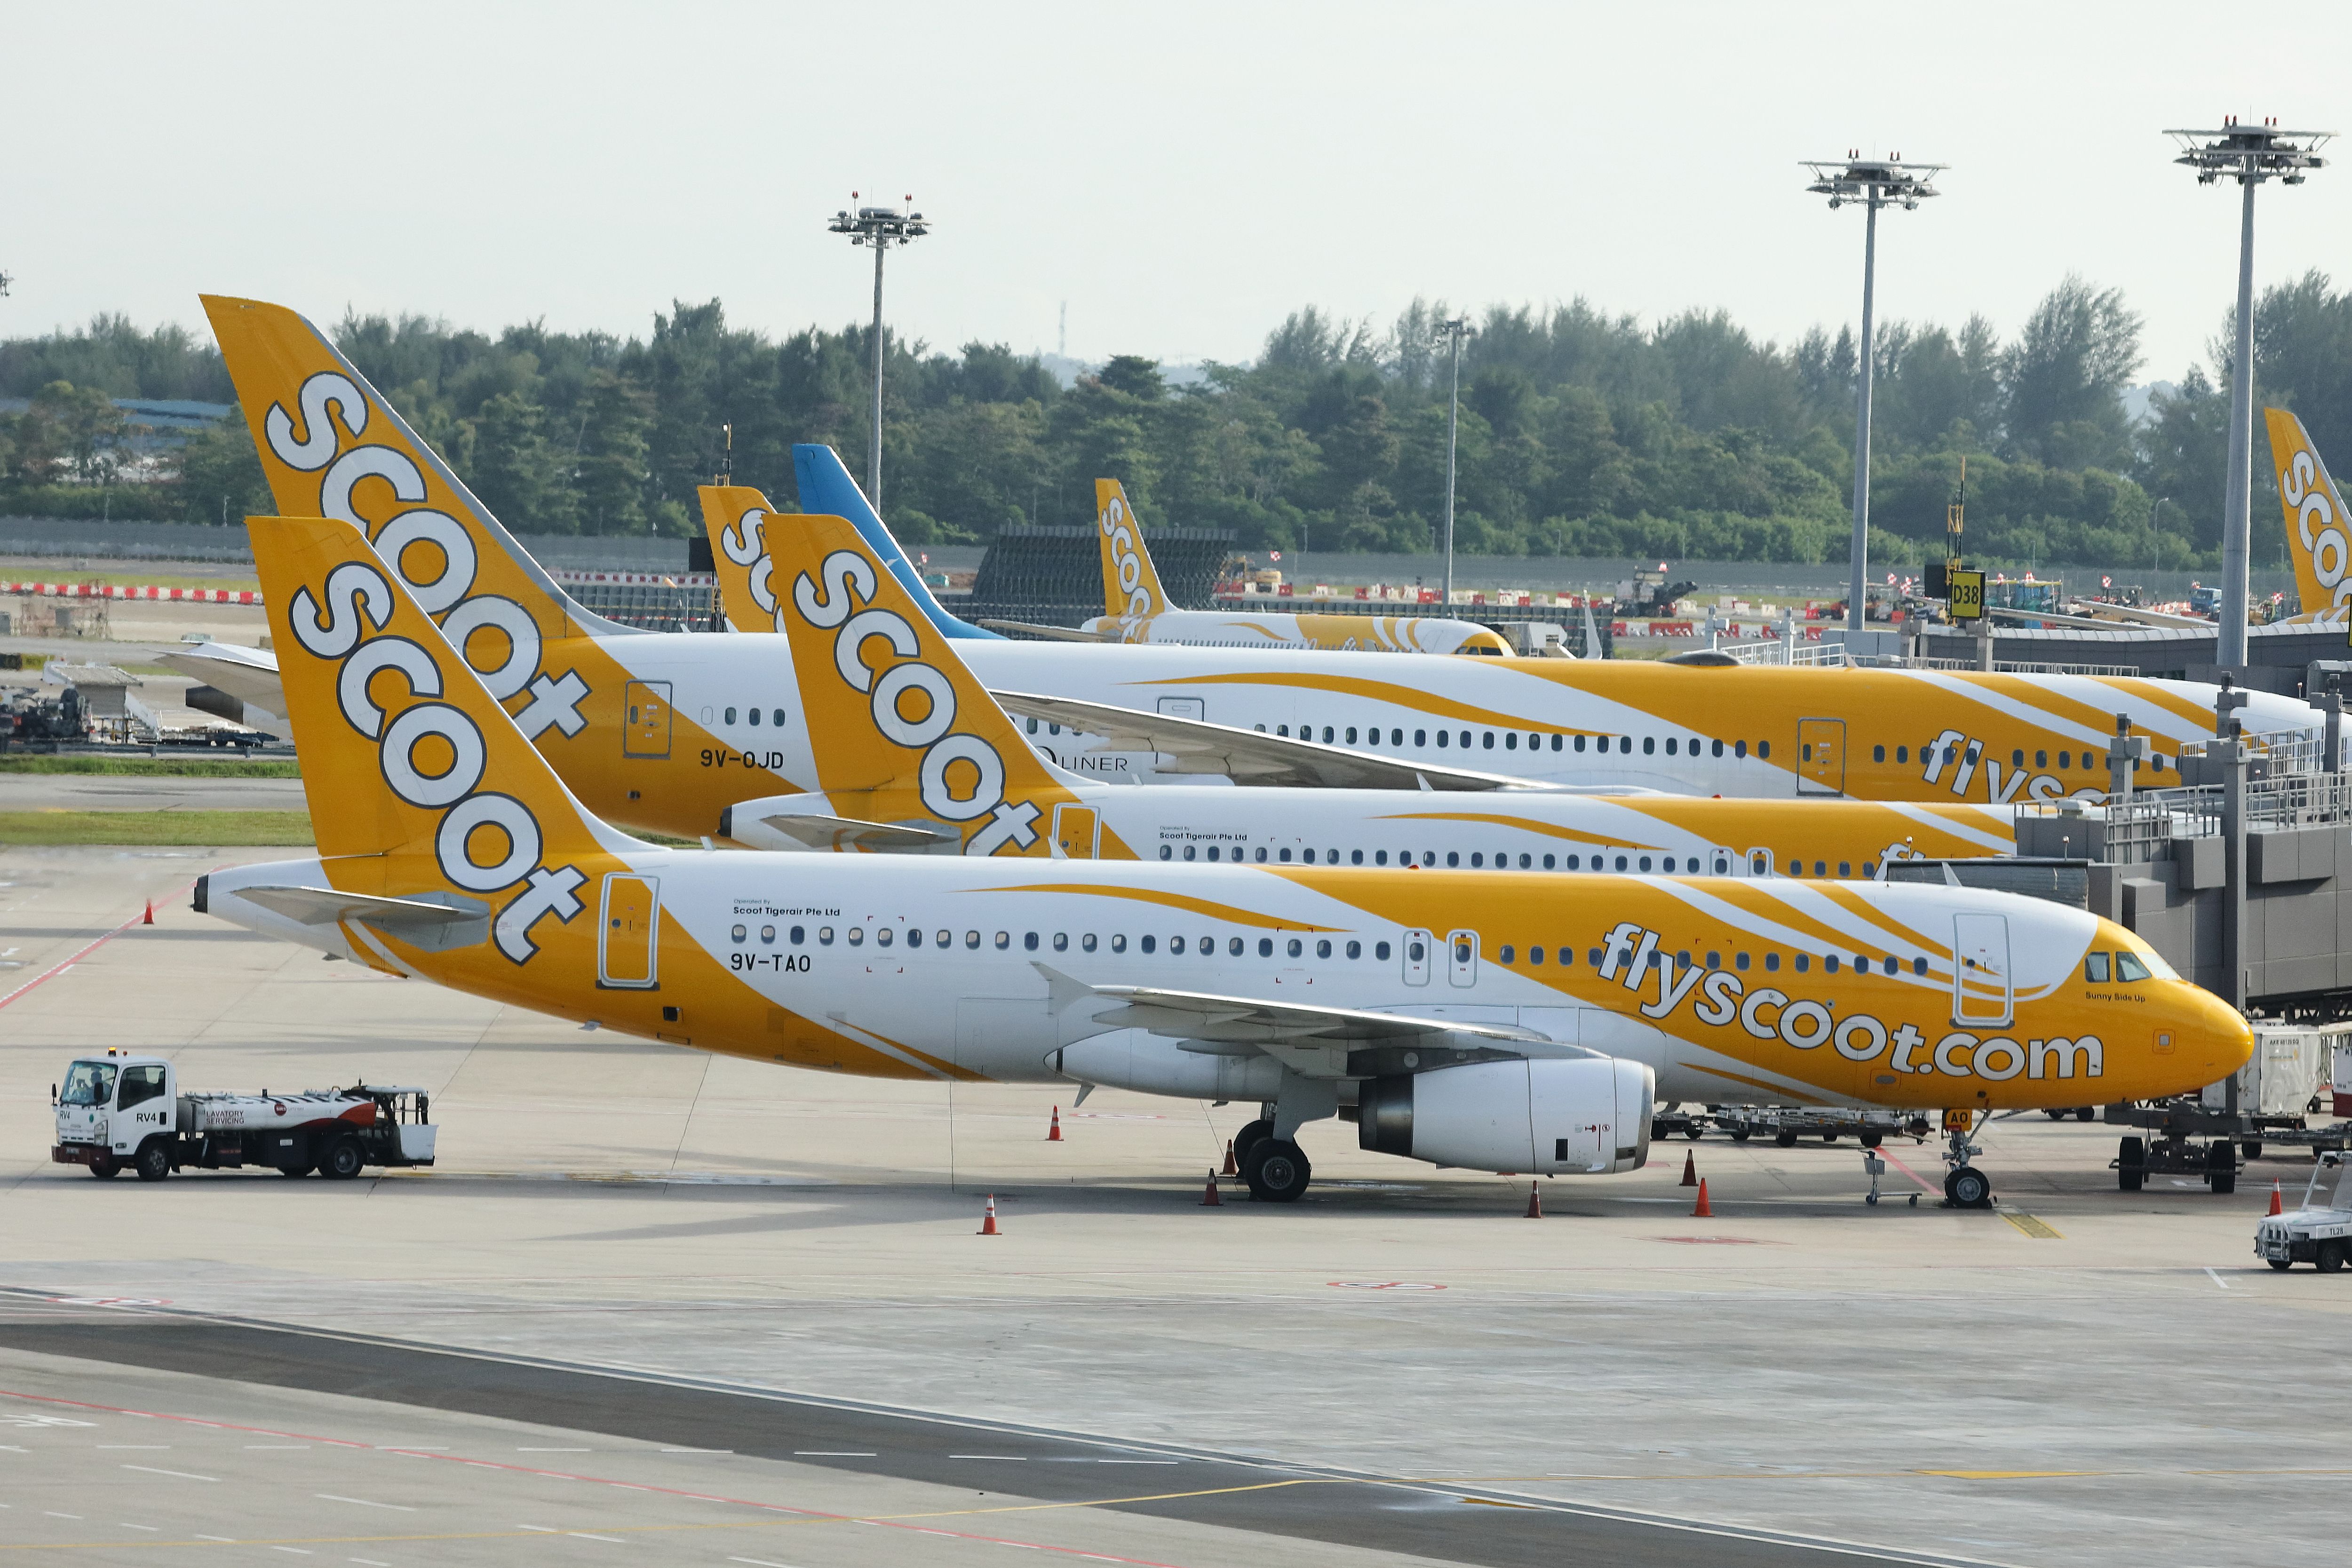 Scoot aircraft grounded at Changi Airport 